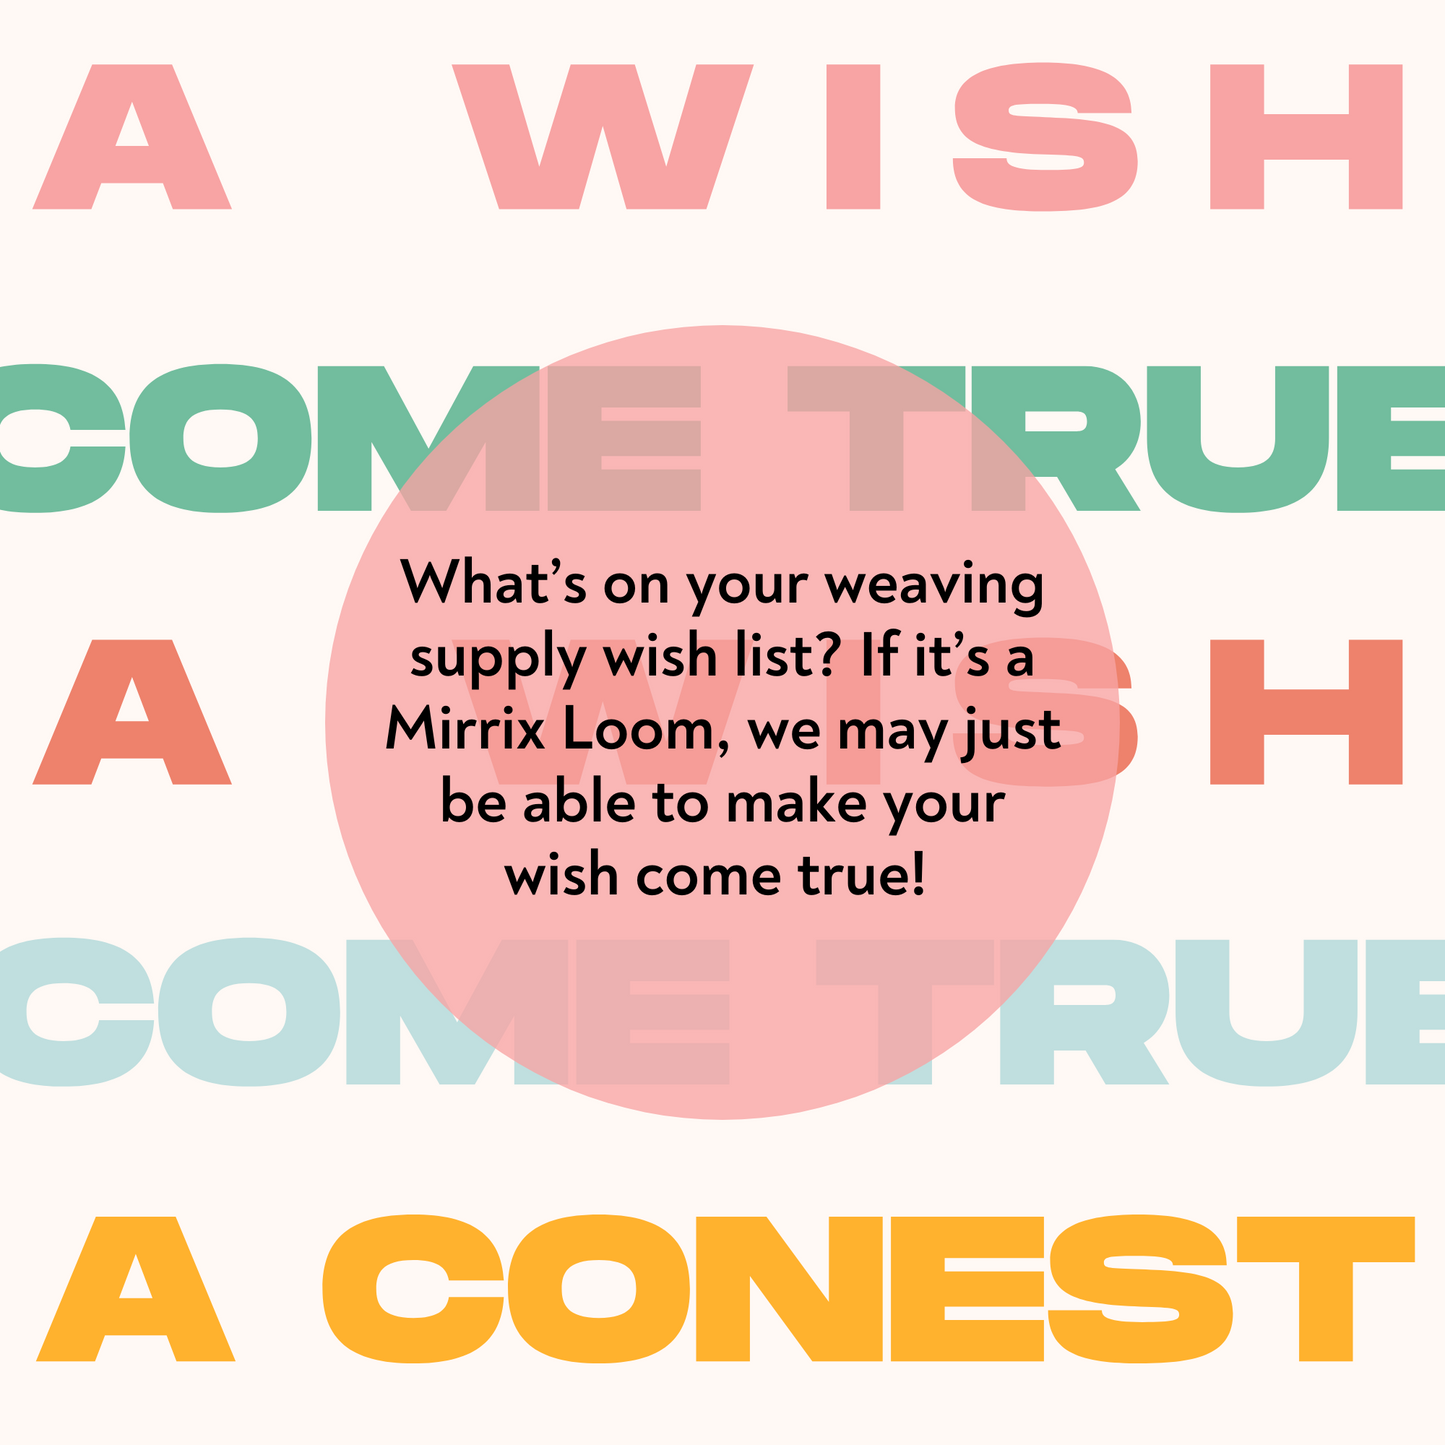 Contest: A Wish Come True - This contest has ended